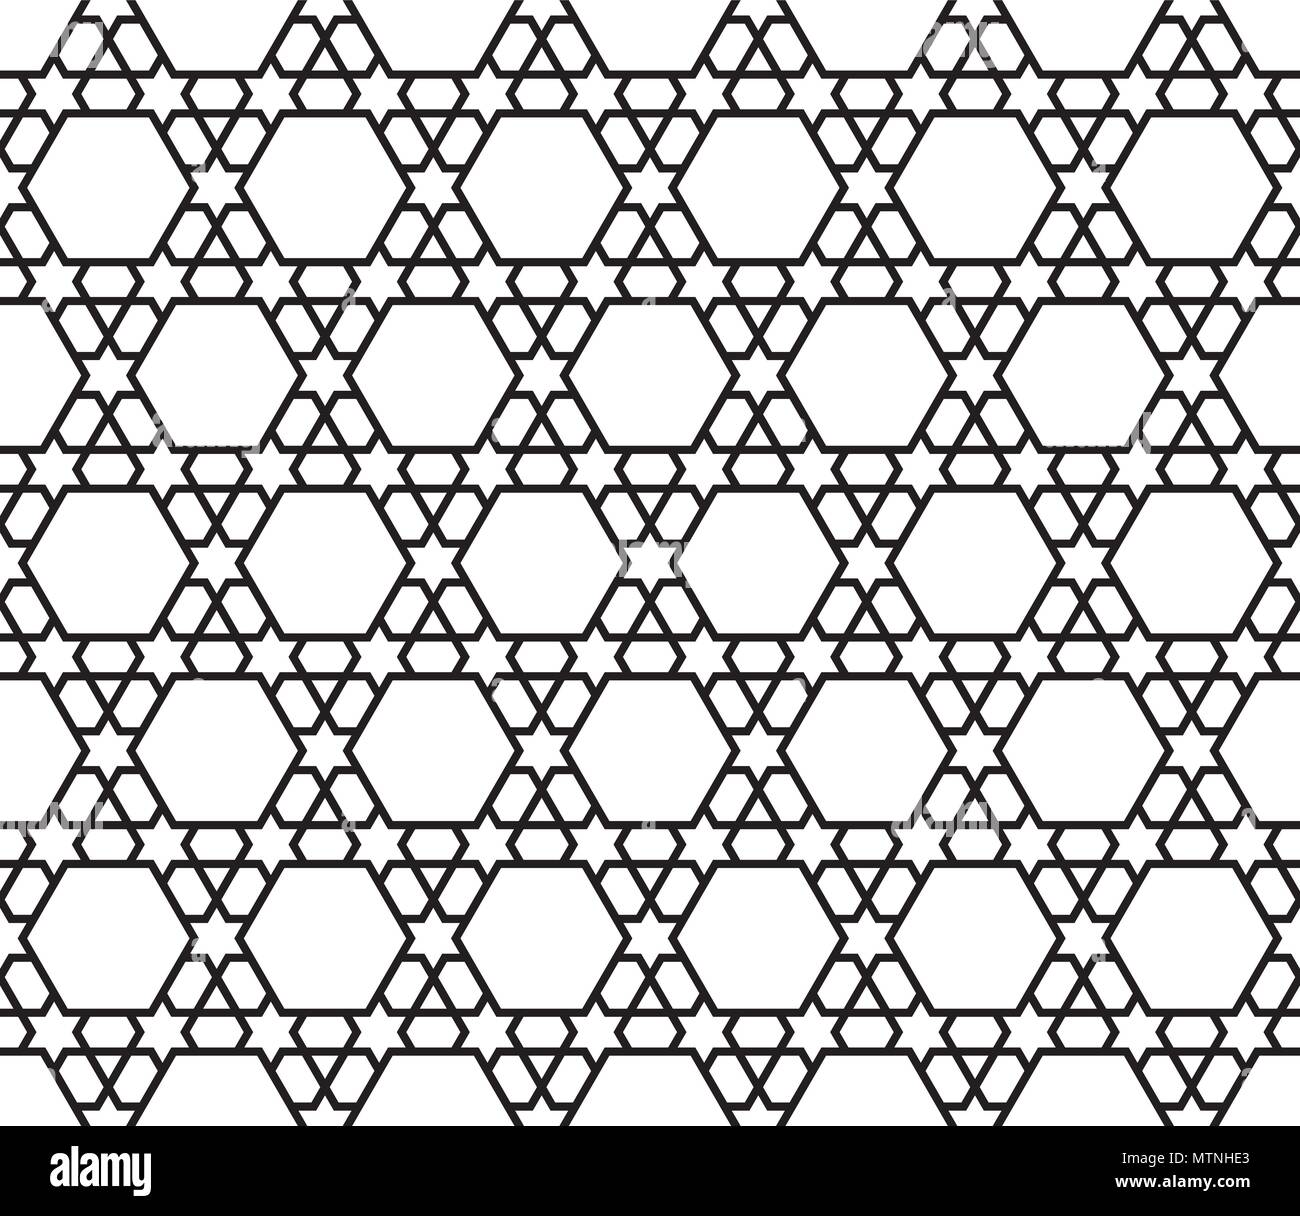 Seamless pattern in black and white in average lines.Based on arabic geometric patterns. Stock Vector